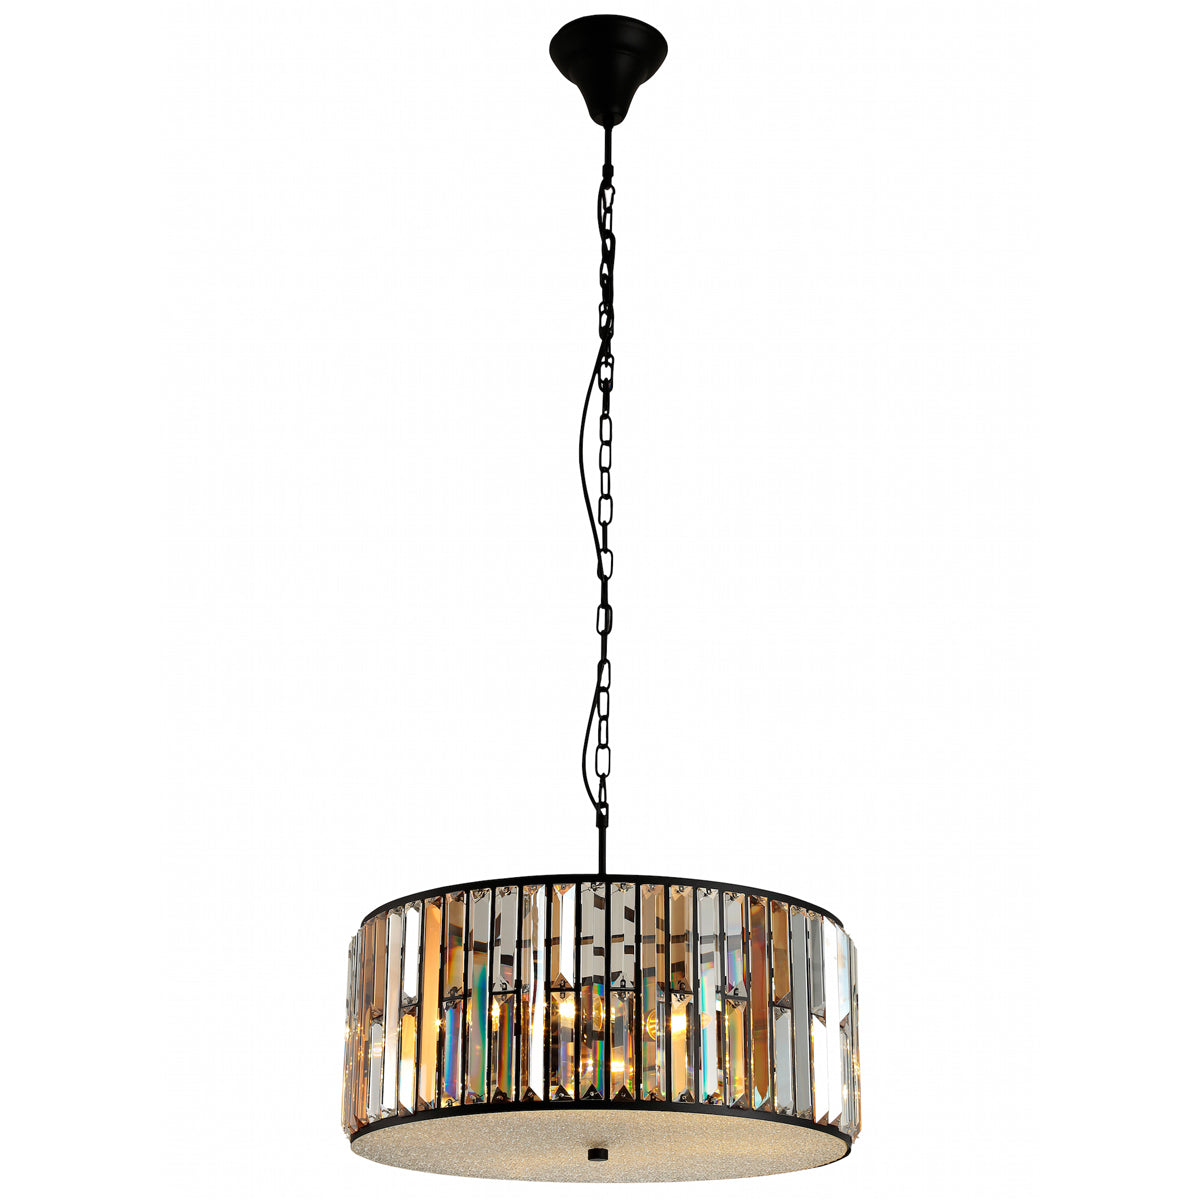 Looking for something that little more extravagant that will give your room the touch of luxury that it really deserves. Our Amber Crystal ceiling pendant light does just that with its bronze, brown and silver glass crystals in a round design and complemented with a black metal adjustable chain creating something truly spectacular.